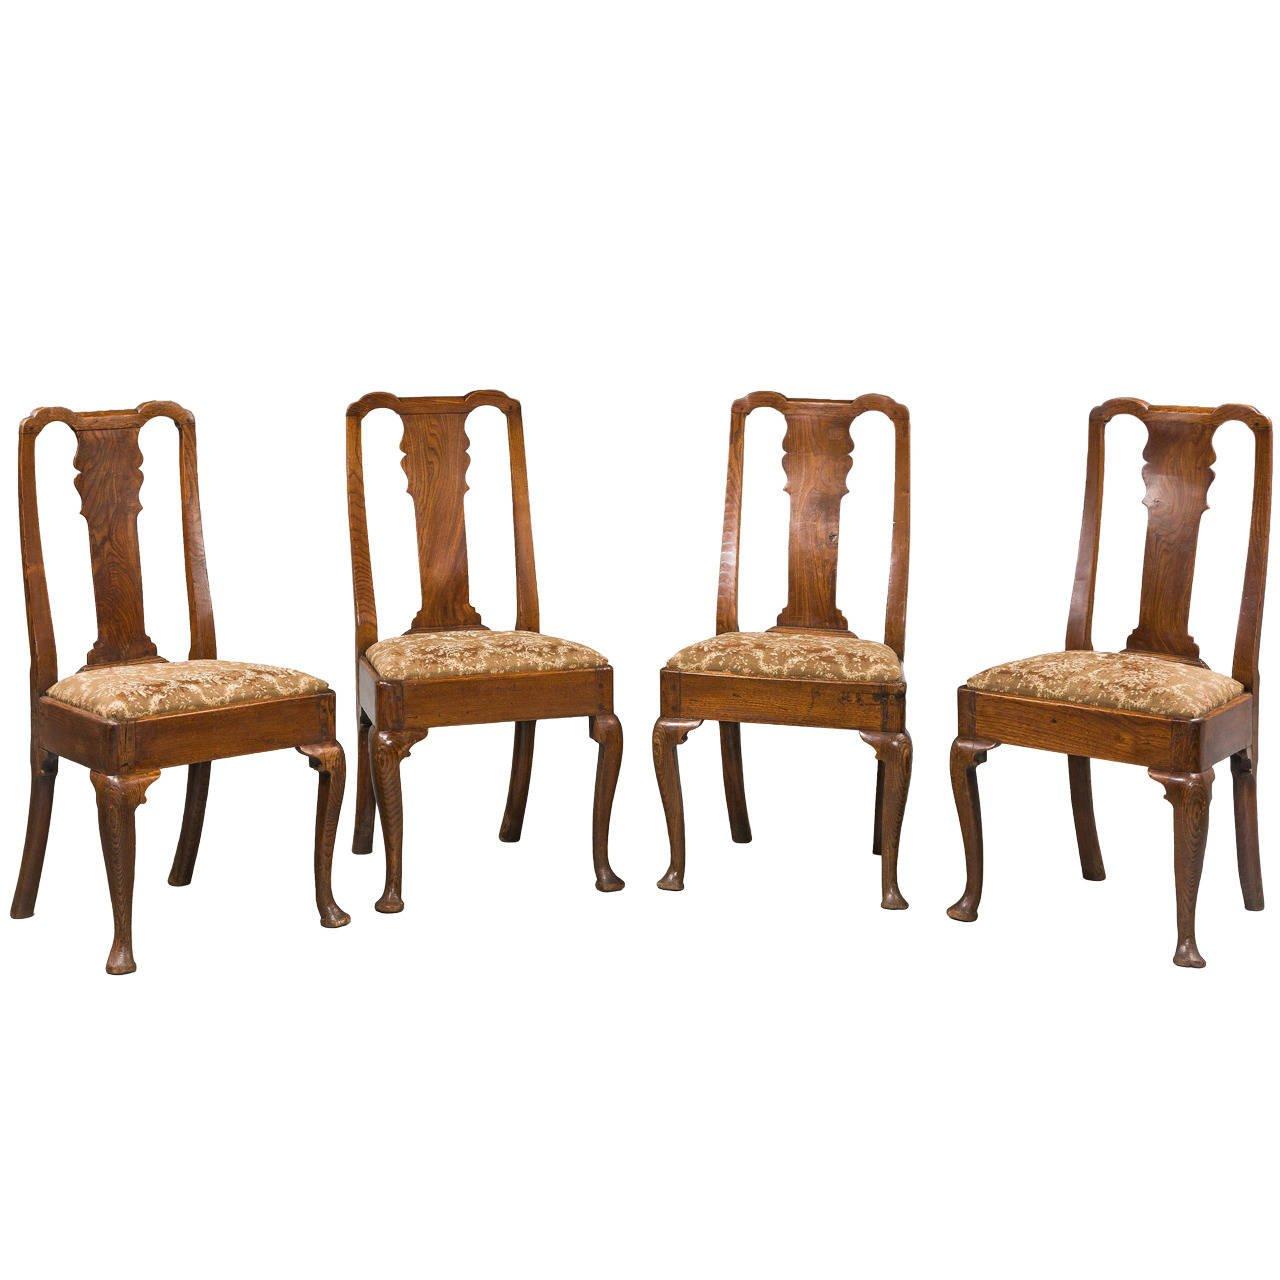 Set of Four George I Period Elm Chairs